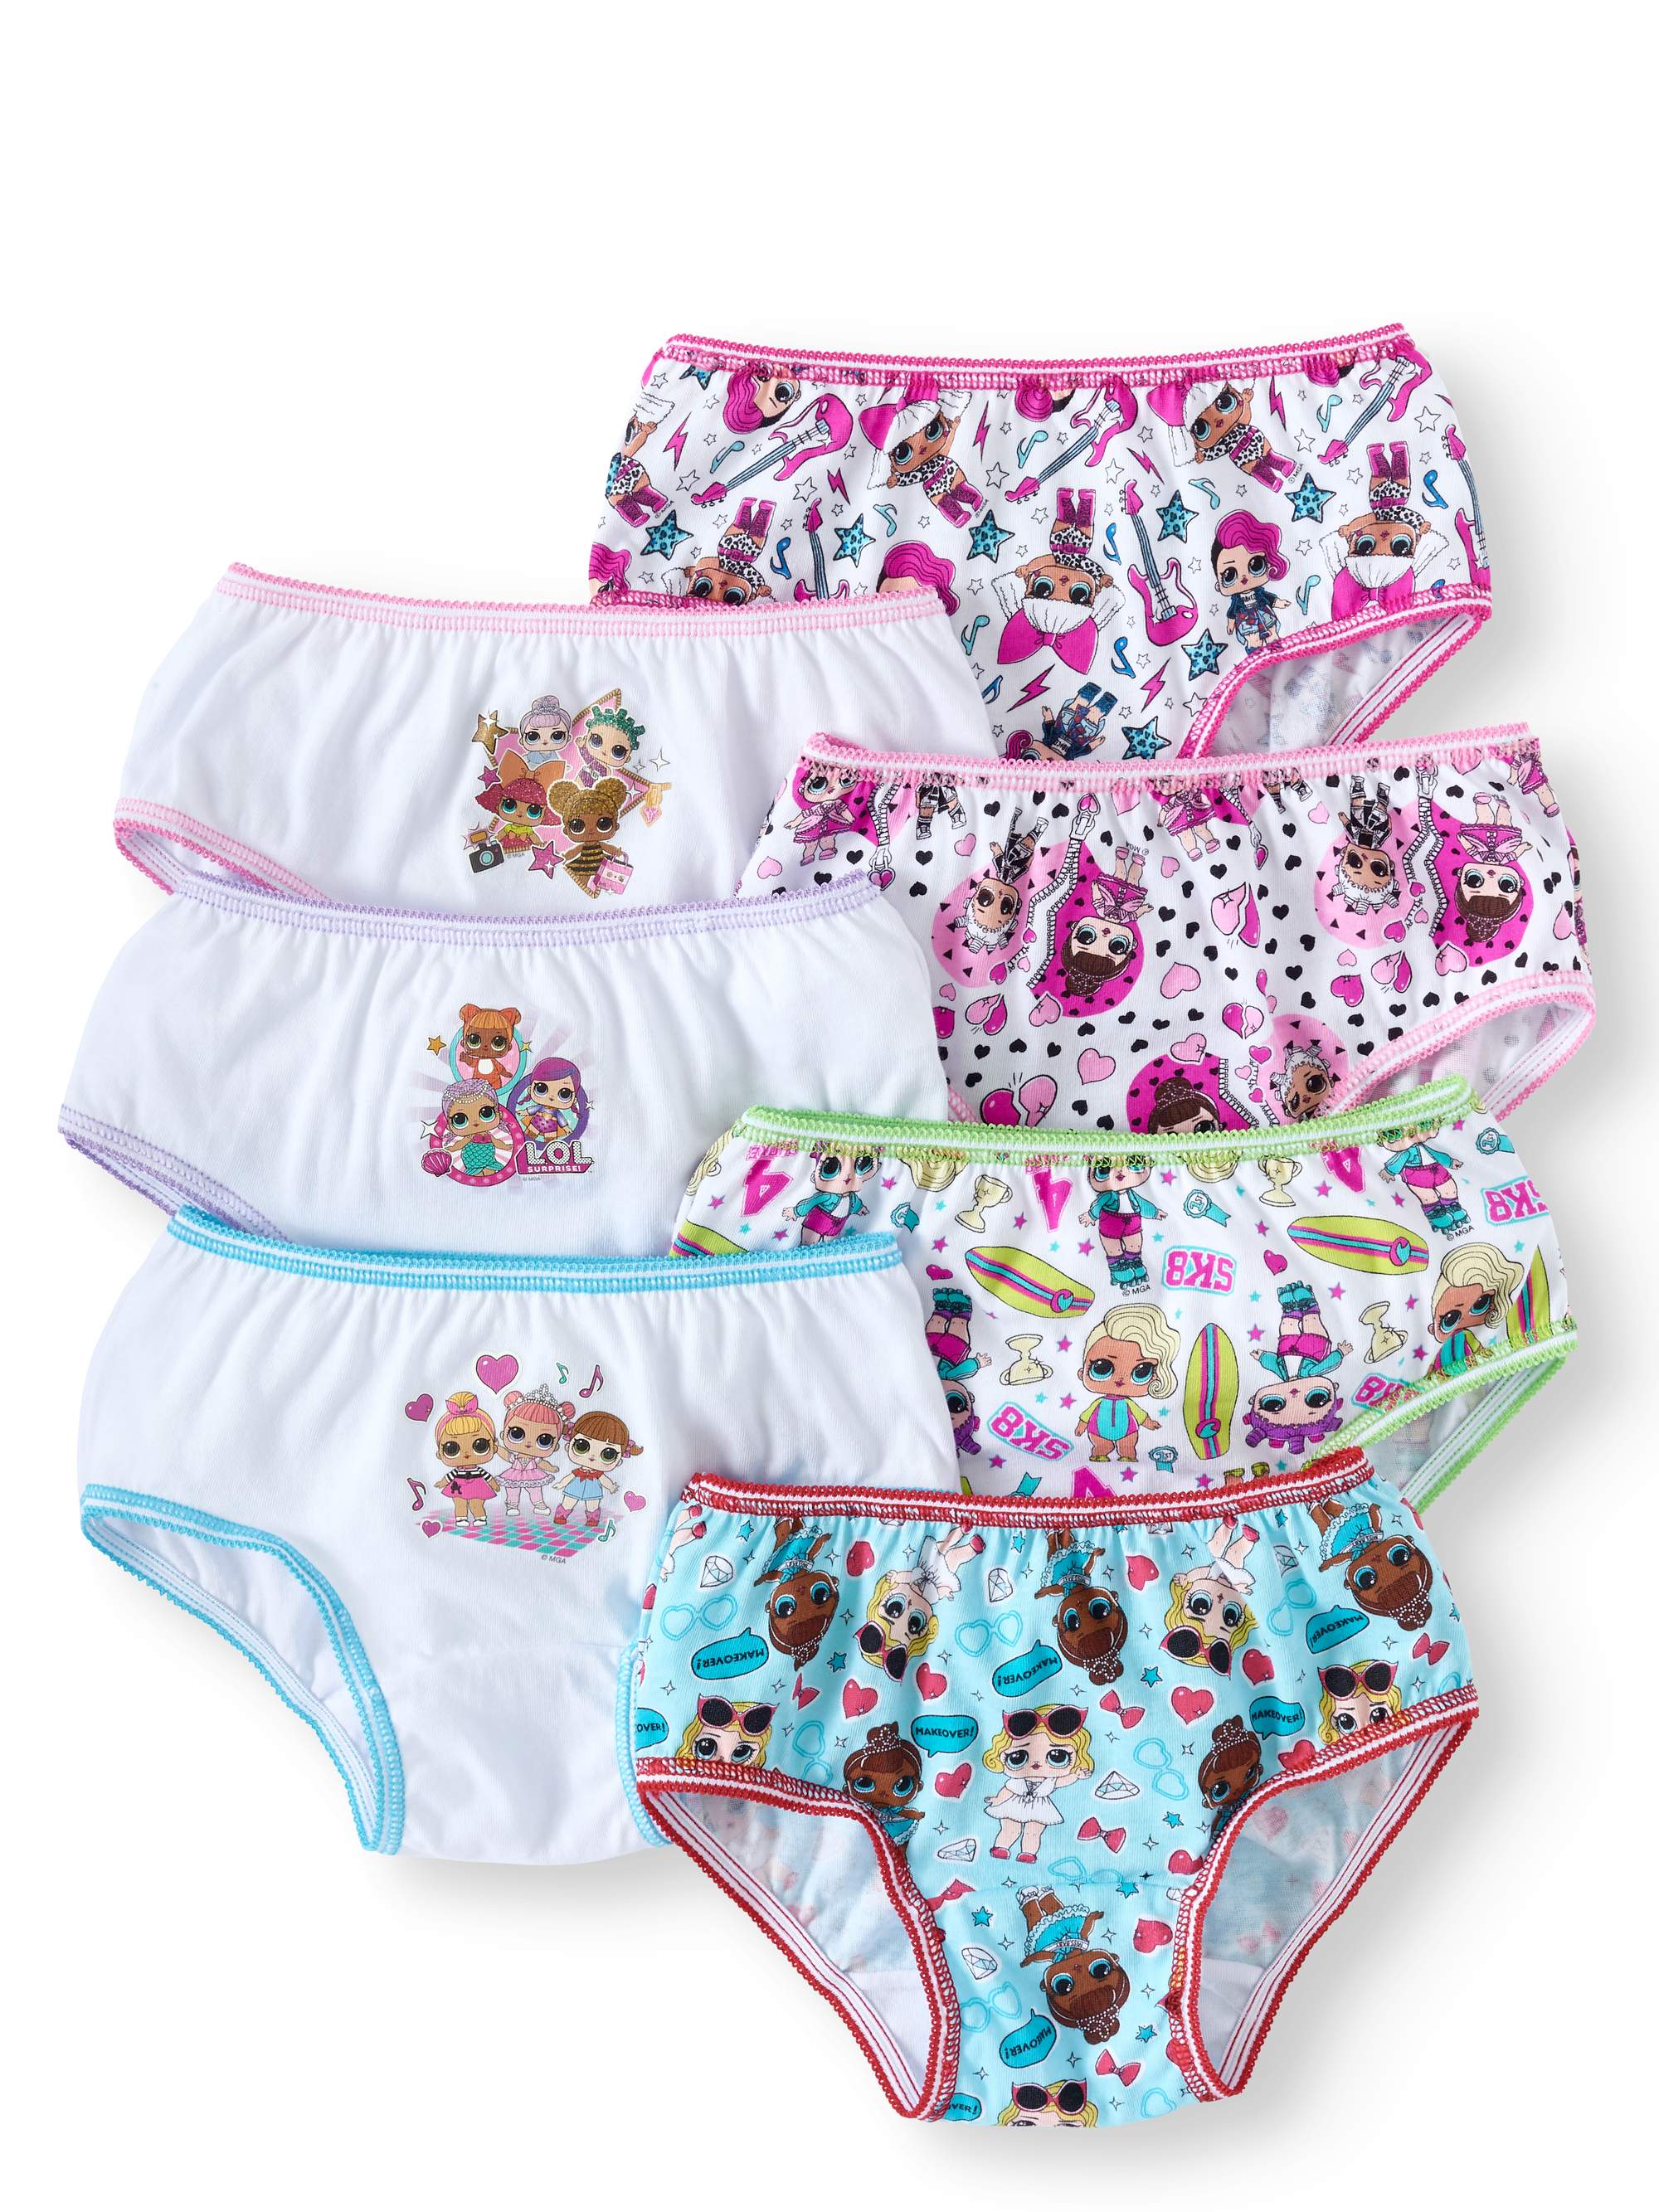 L.O.L. Surprise! Girls Underwear, 7 Pack Brief Panties Sizes 4 - 8 - image 1 of 3